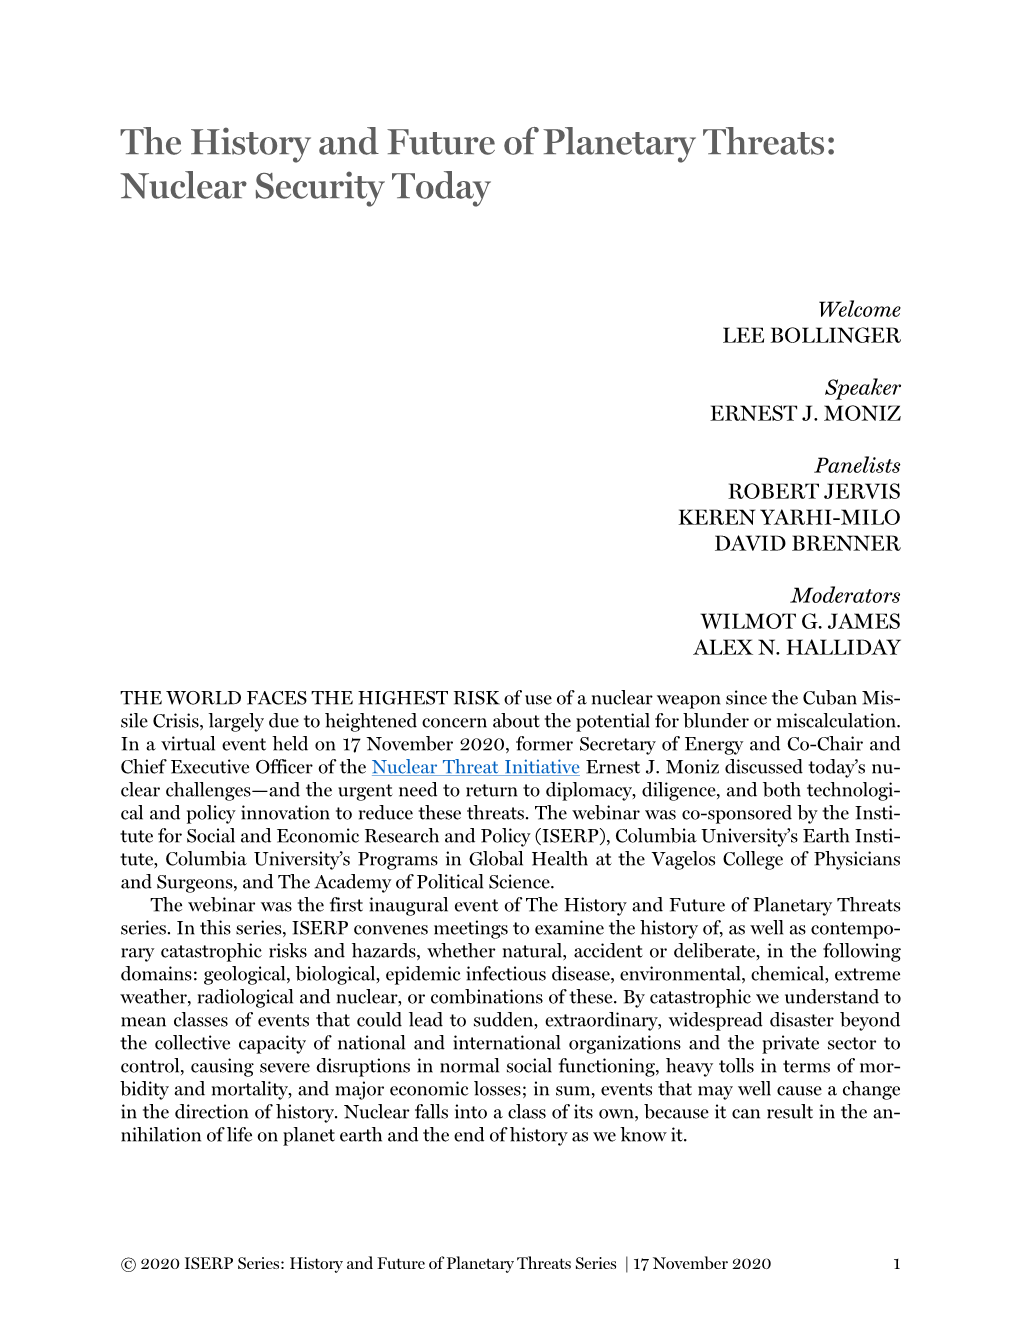 Nuclear Security Today